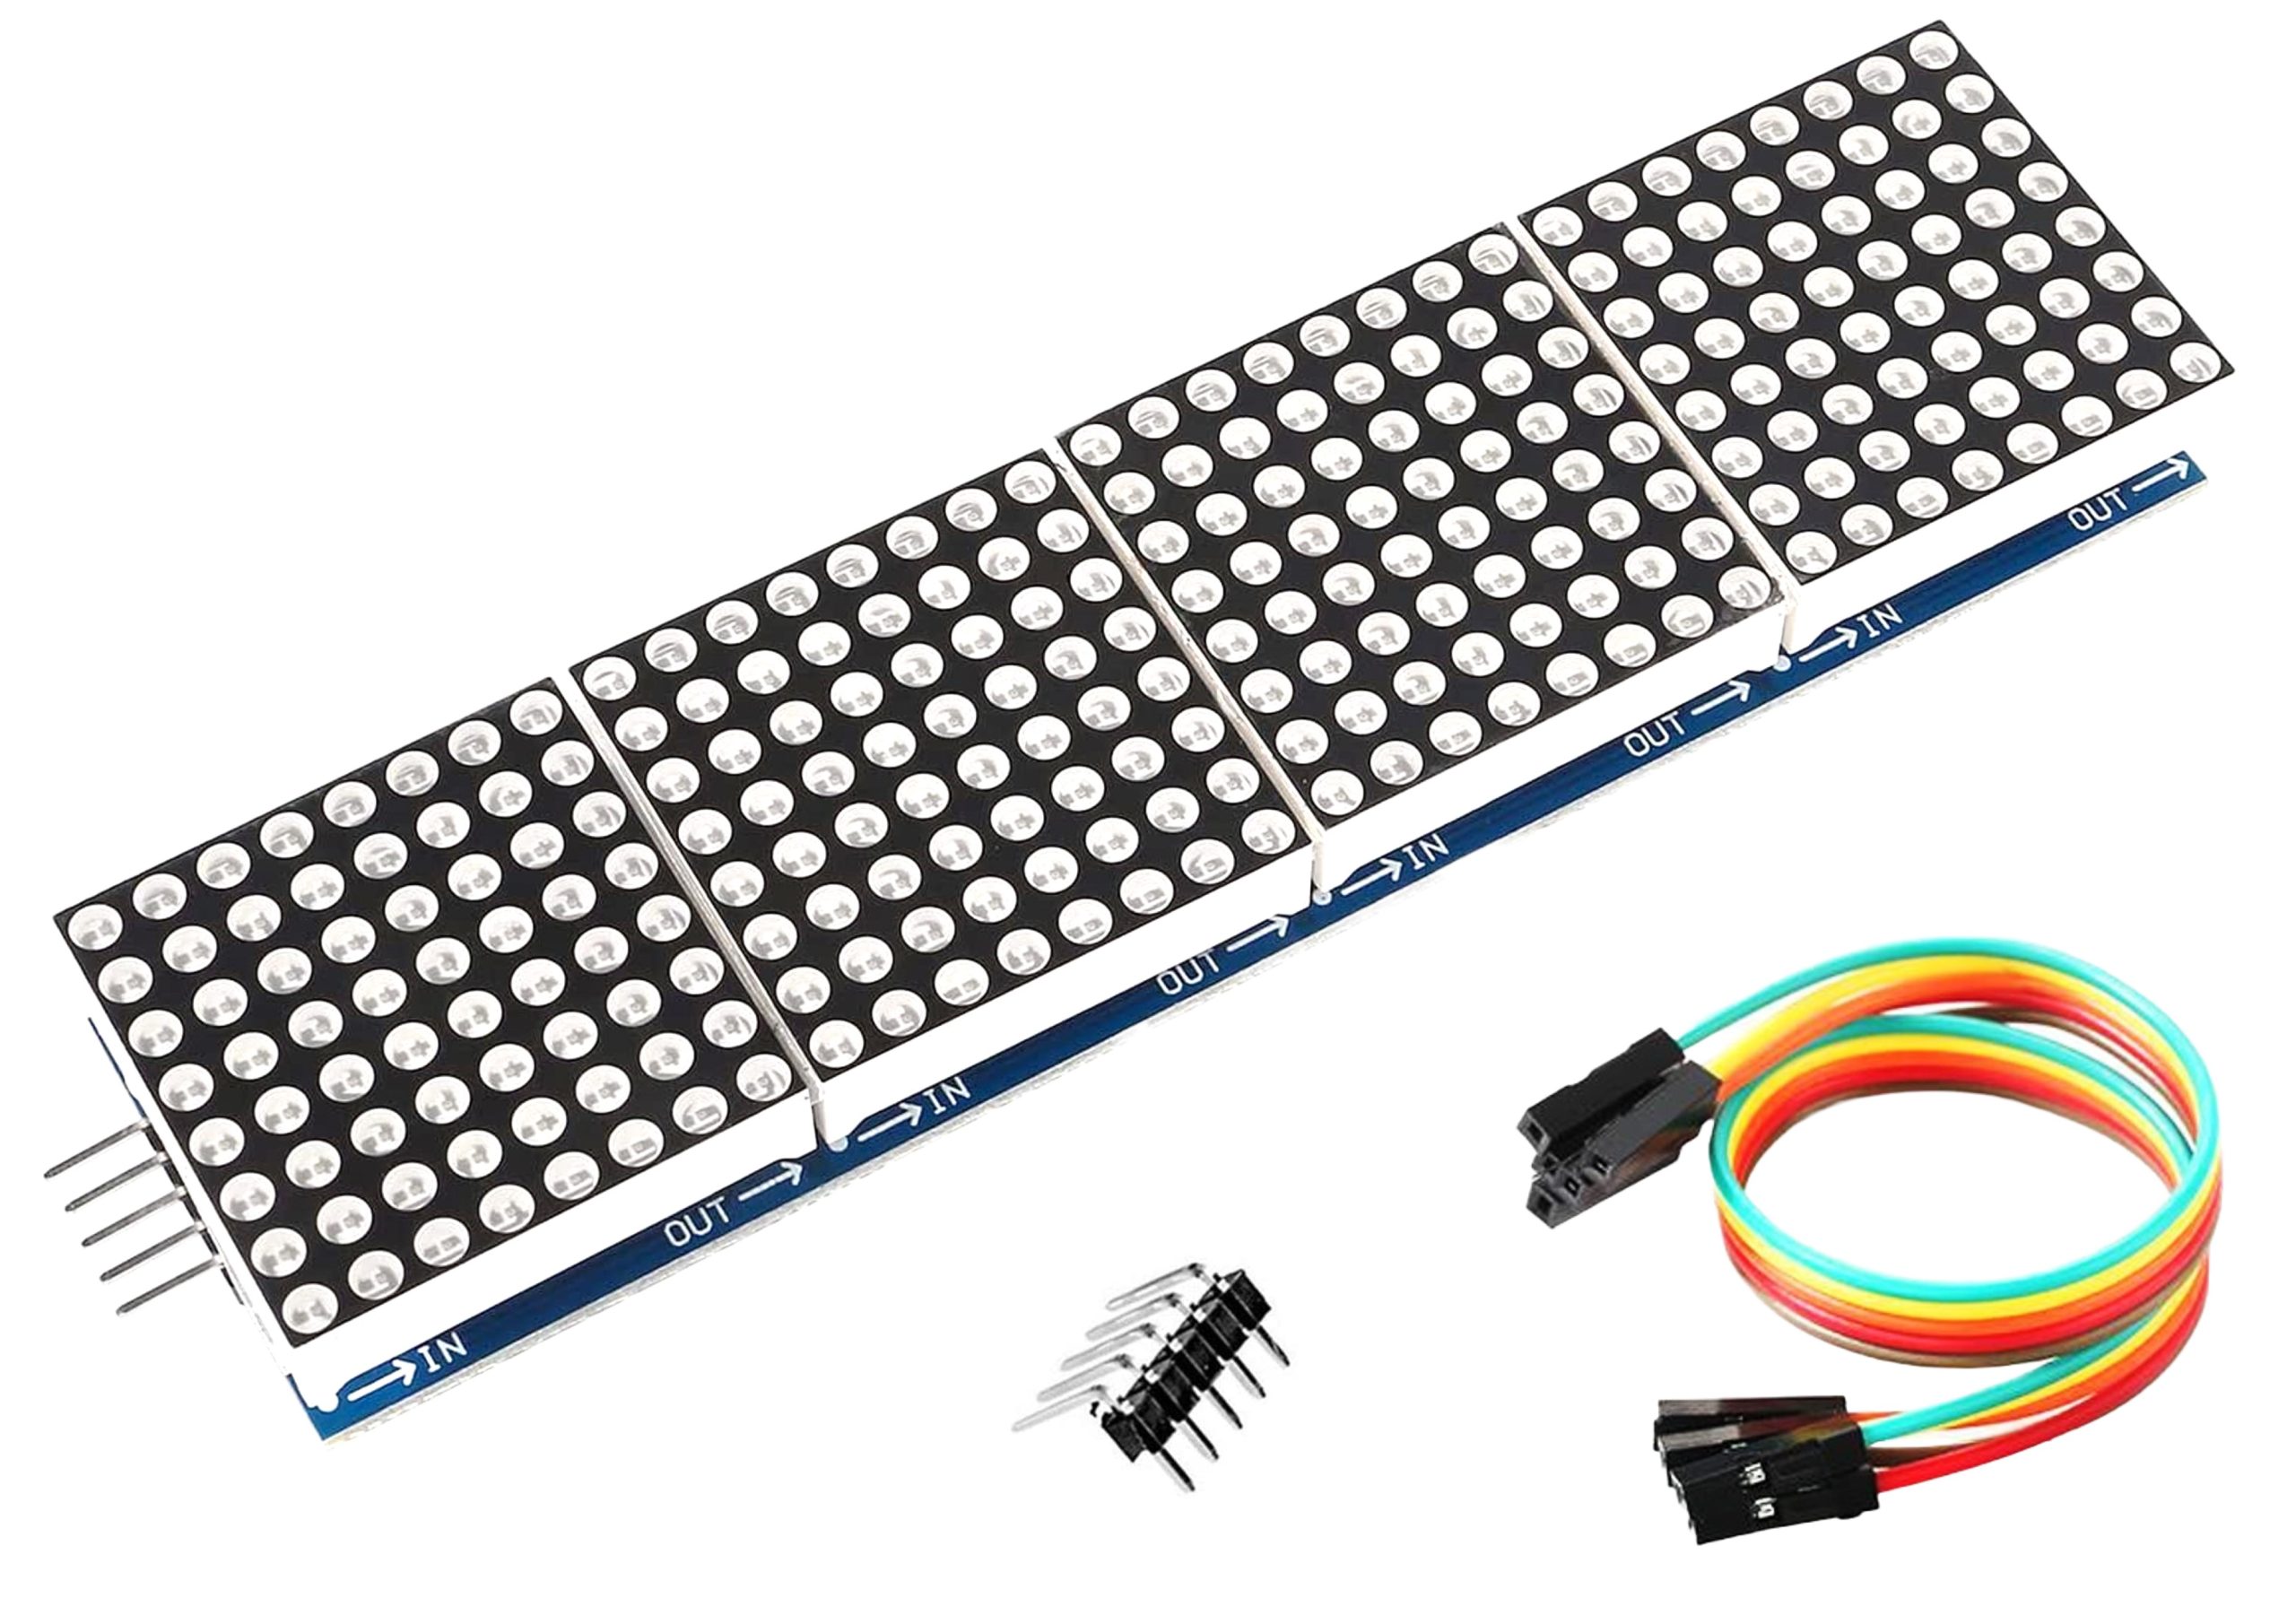 LED MATRIX 32 x 8 points red/blue/green –  – At least